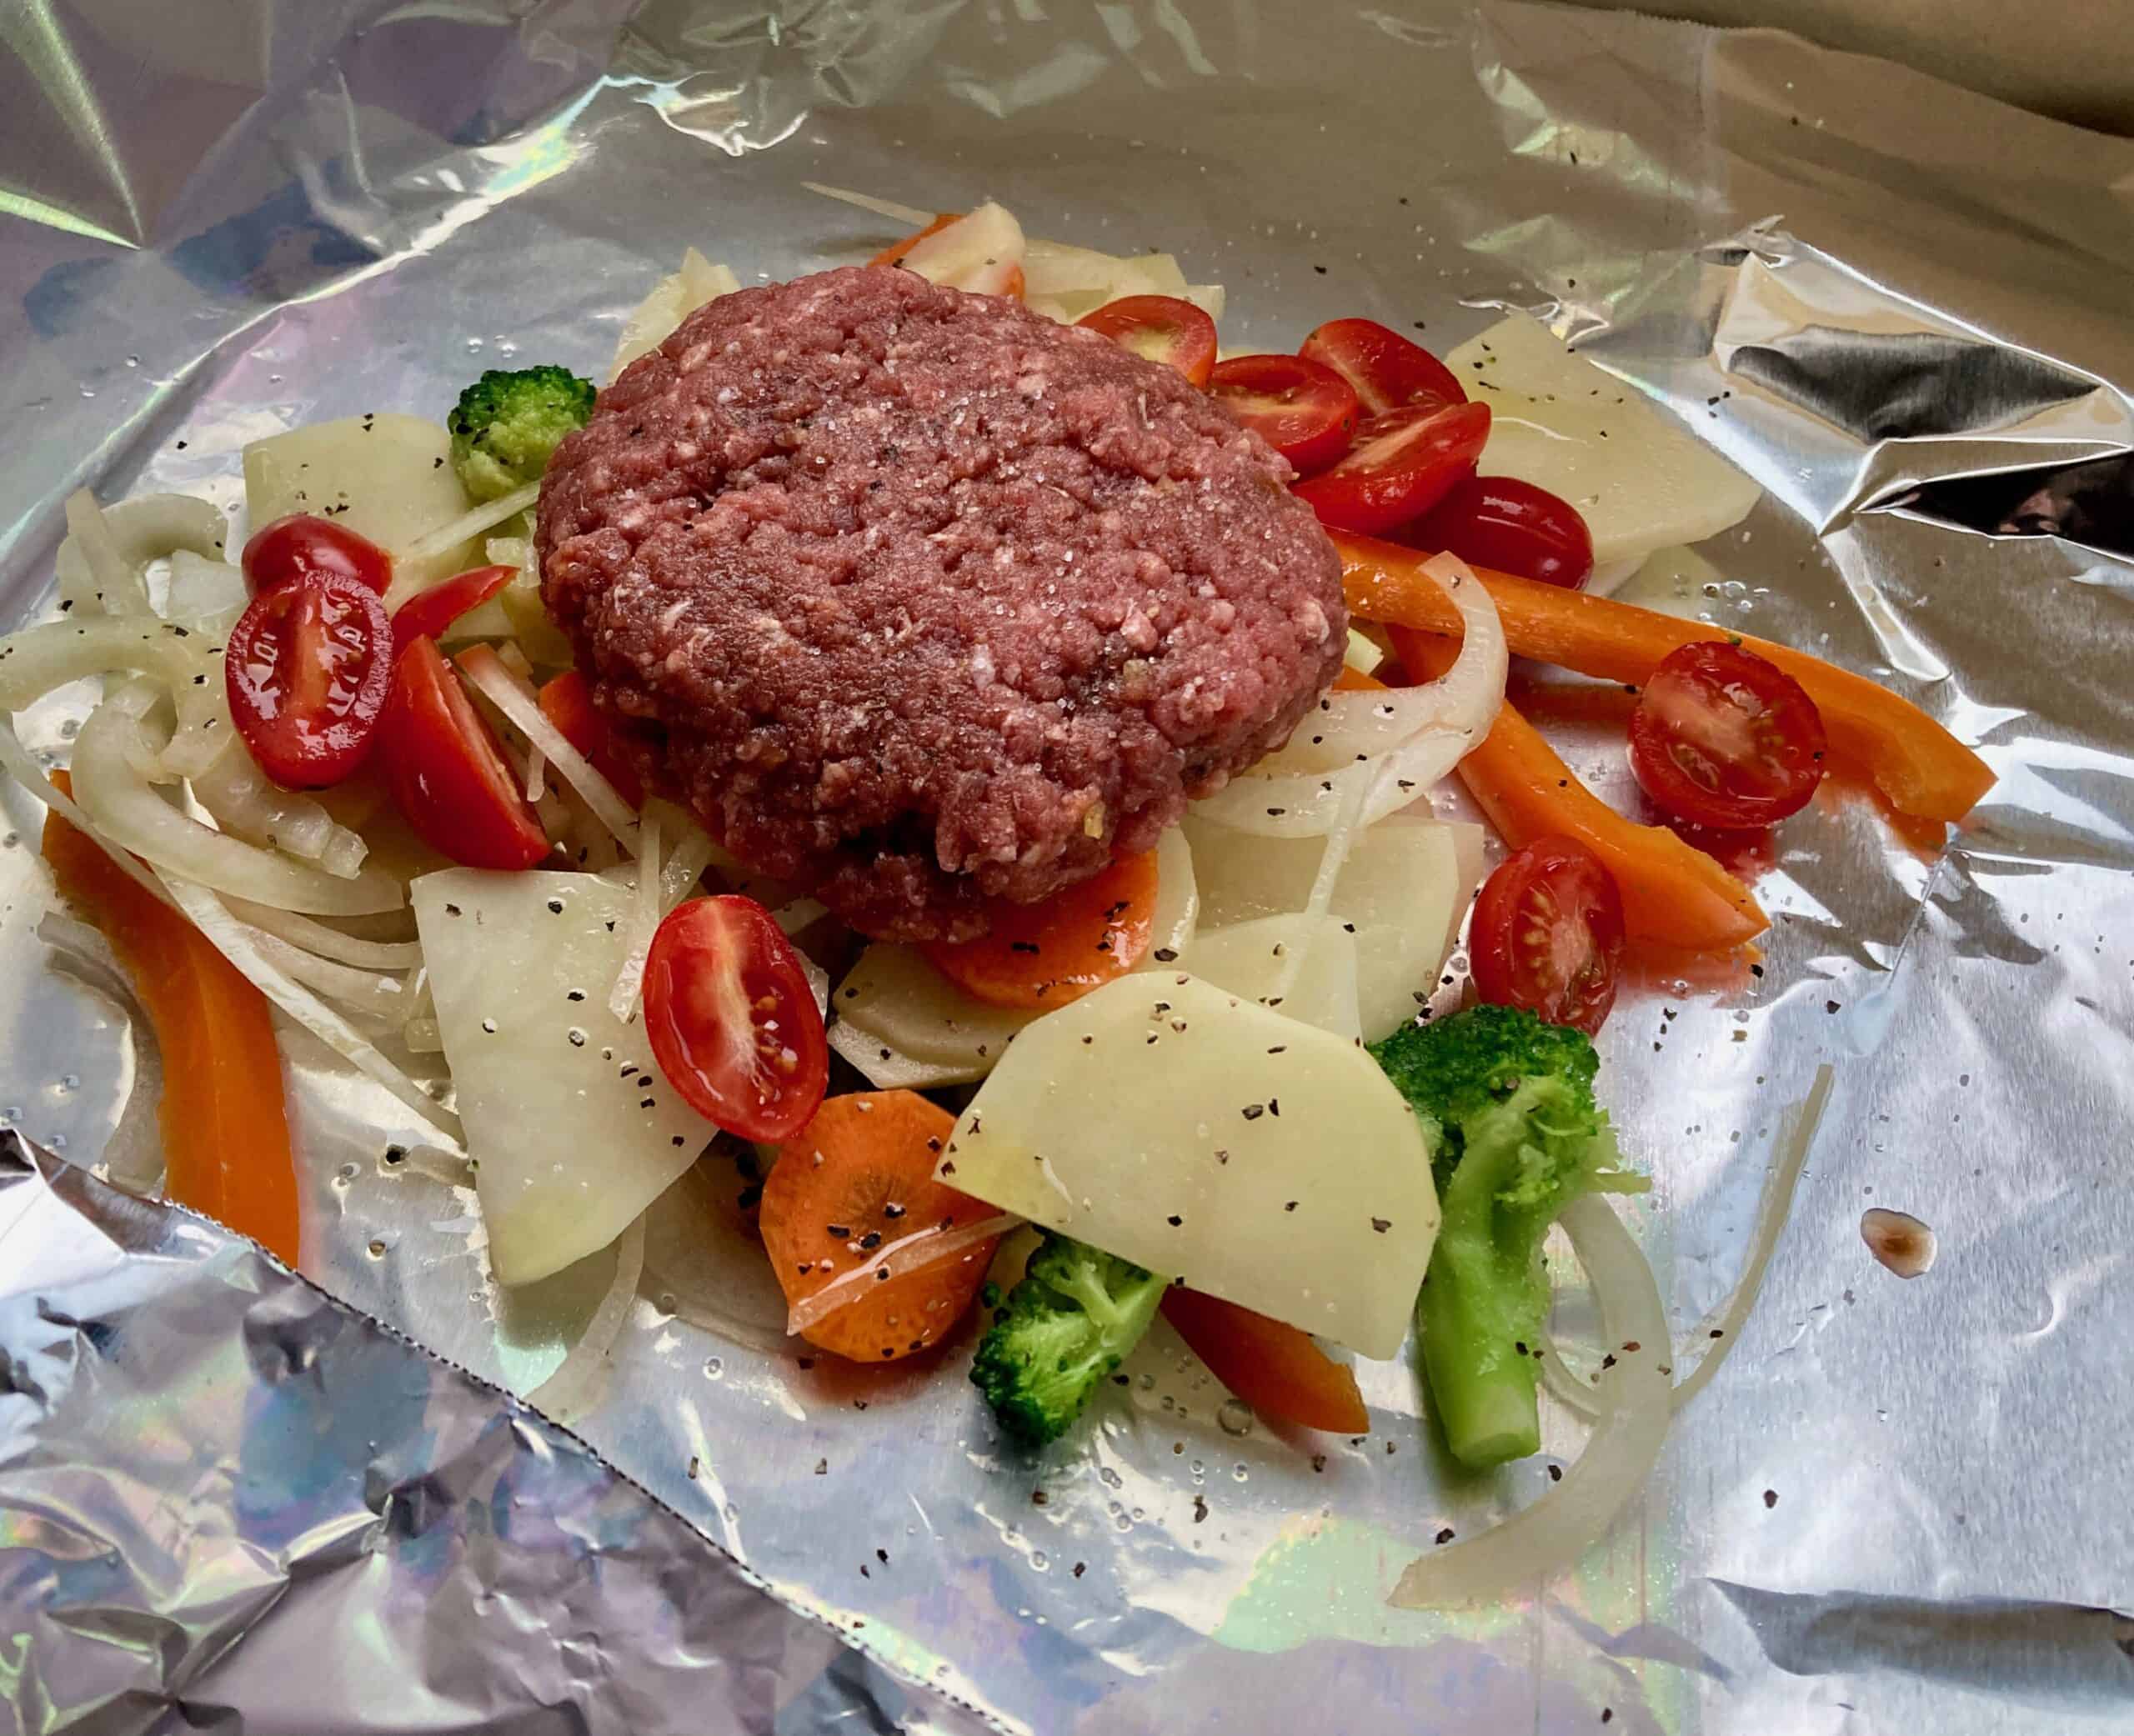 Assorted vegetables and ground beef patty on a sheet of heavy duty aluminum foil.